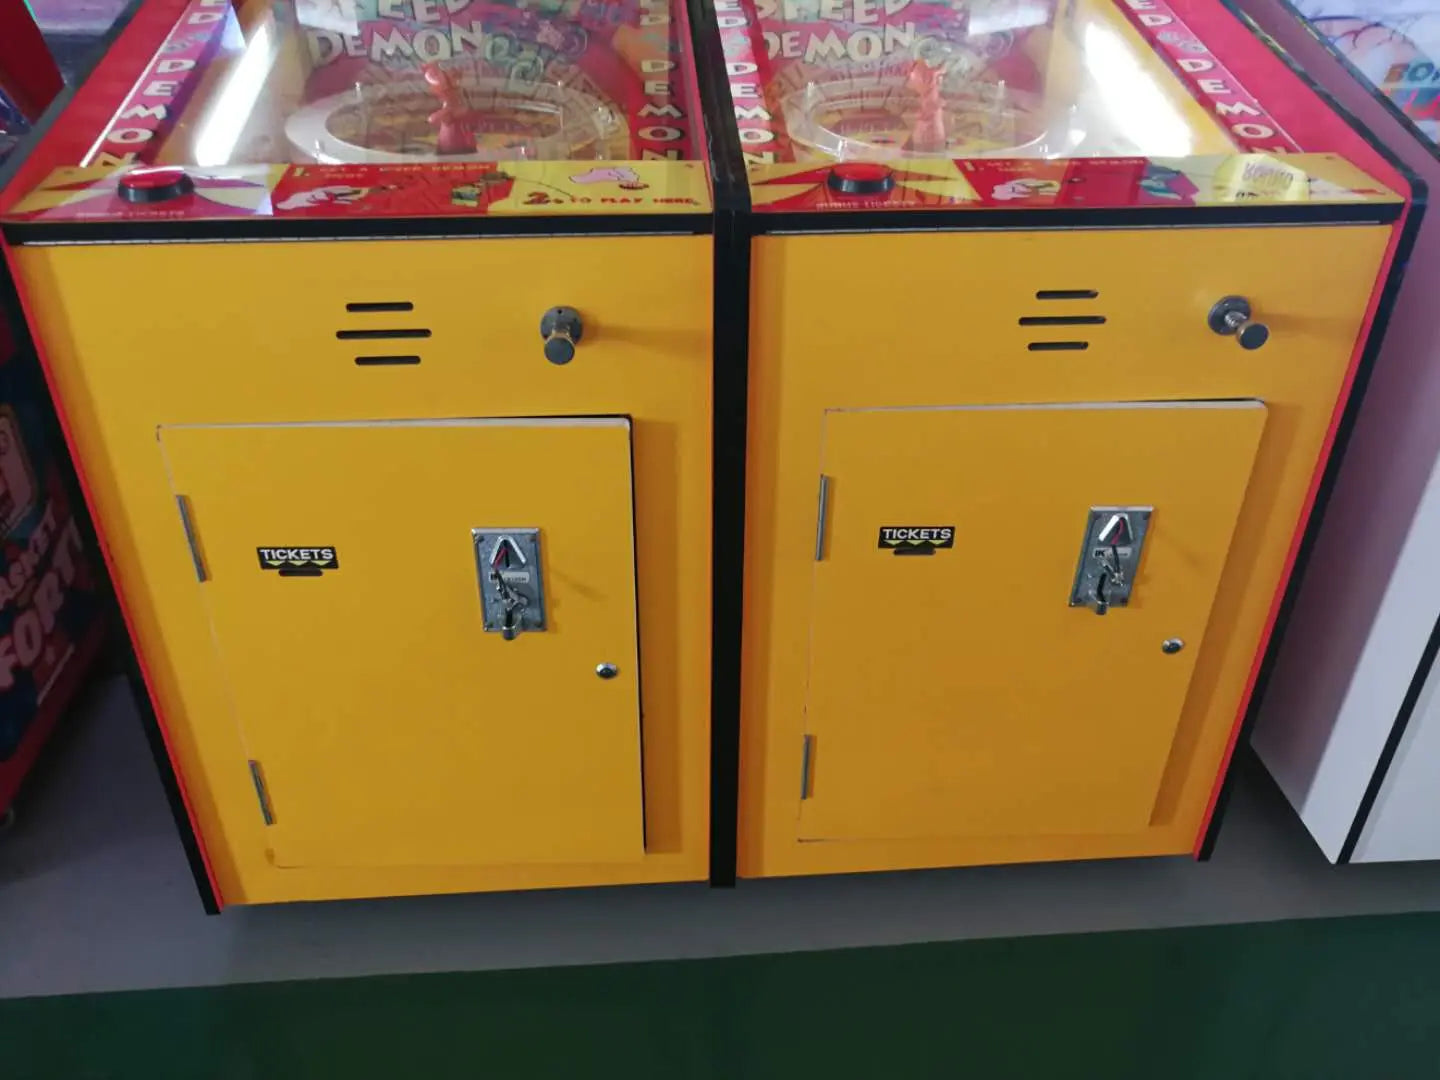 Speedy-Pizza-Speed-Demon-game-machine-Amusement-Coin-Operated-Lottery-Ticket-Redemption-Electronic-games-Tomy-Arcade